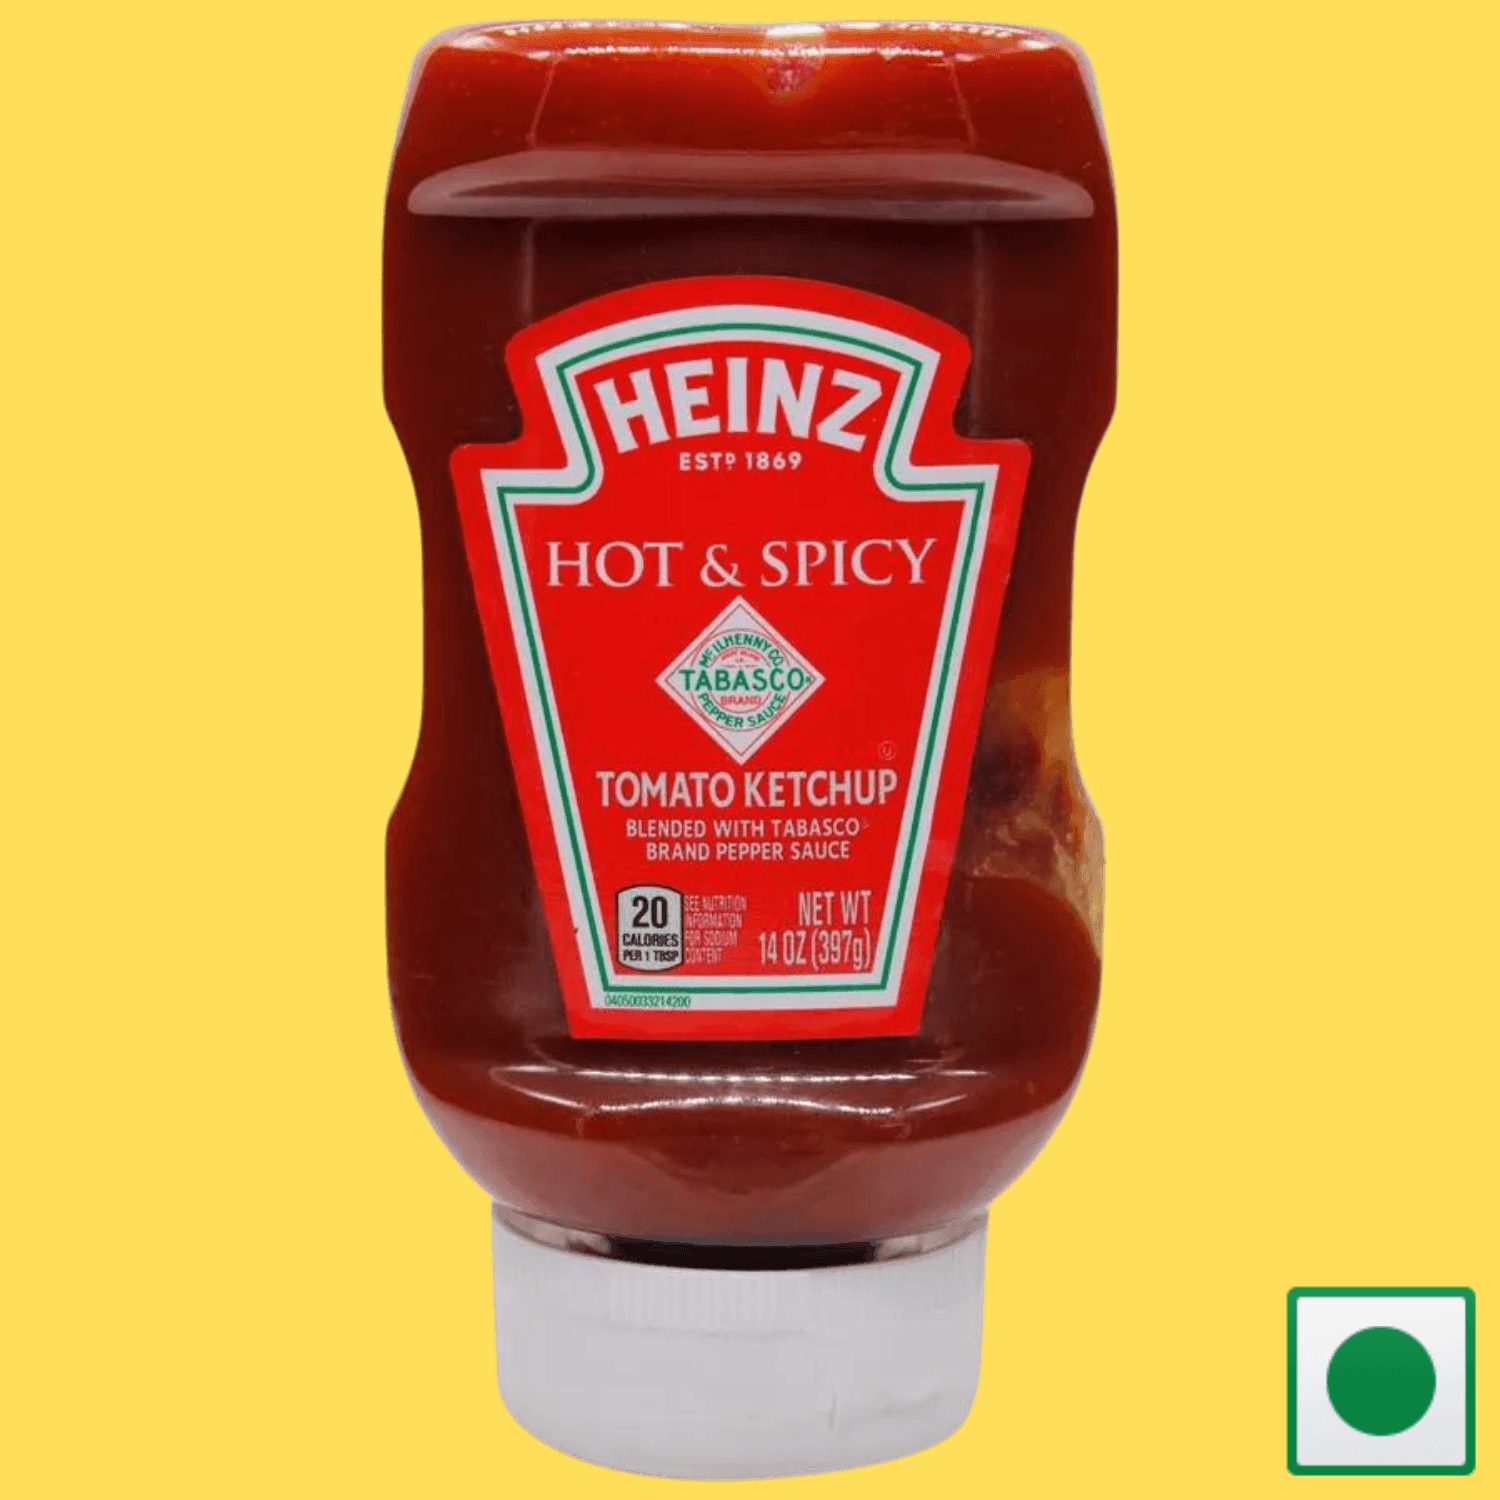 Heinz Hot & Spicy Tomato Ketchup, 397g (Imported) - Super 7 Mart